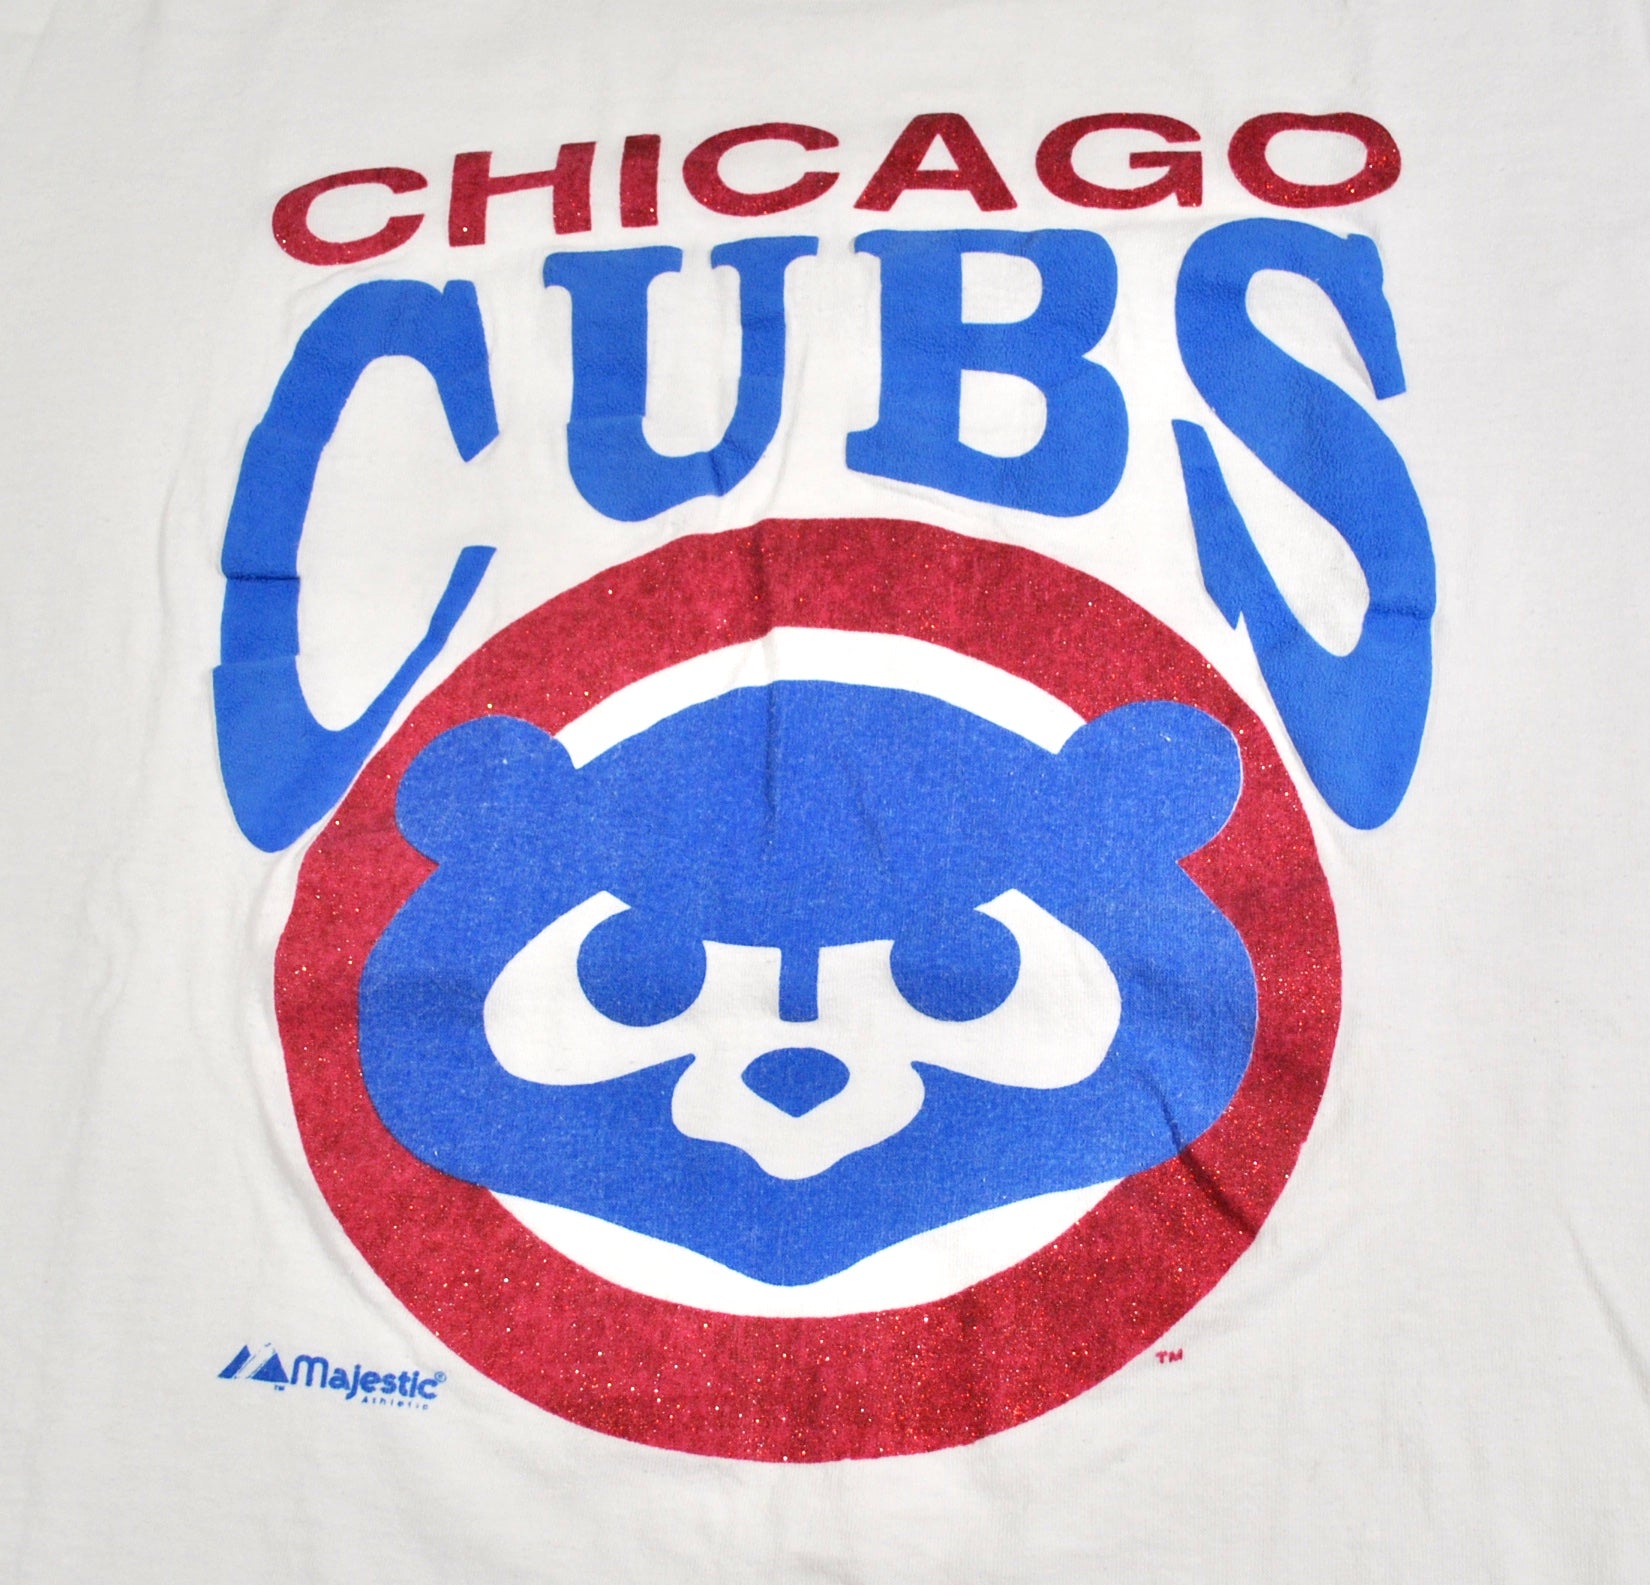 chicago cubs gear on sale